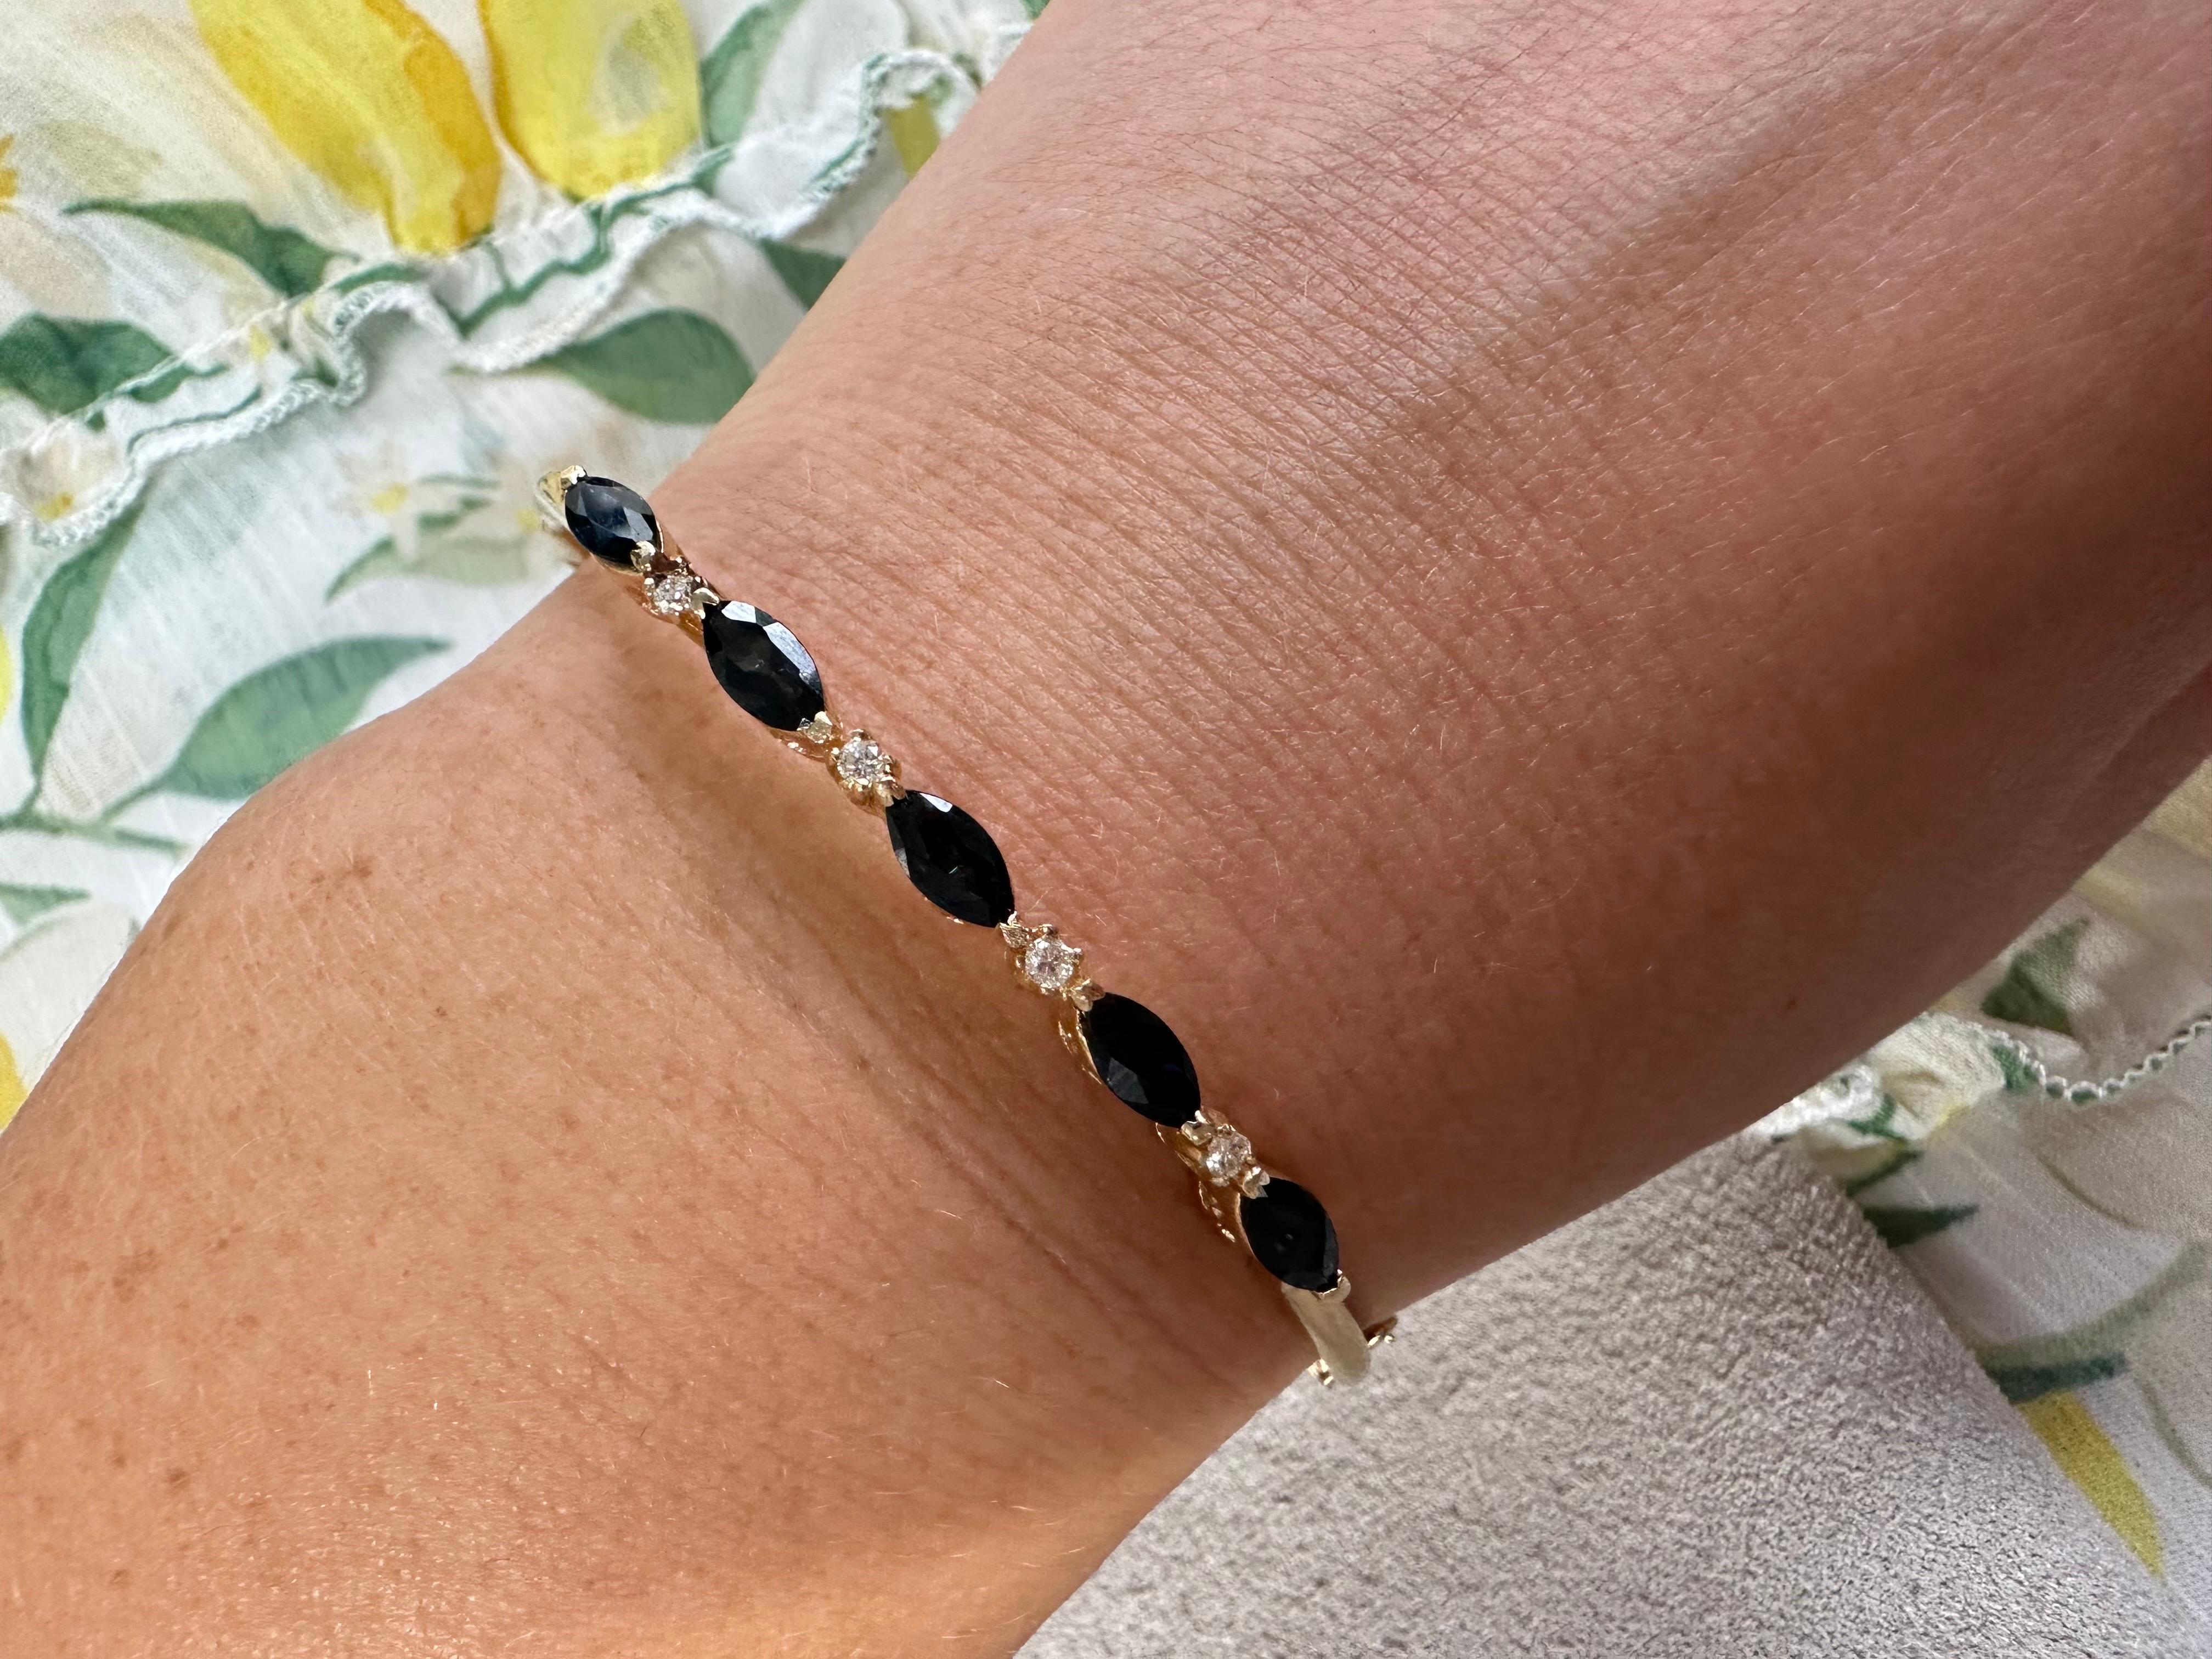 Solid 14KT bangle bracelet with security lock, made with dark sapphires and diamonds.

METAL: 14KT
Grams:6.70
Item24000009 aam

WHAT YOU GET AT STAMPAR JEWELERS:
Stampar Jewelers, located in the heart of Jupiter, Florida, is a custom jewelry store